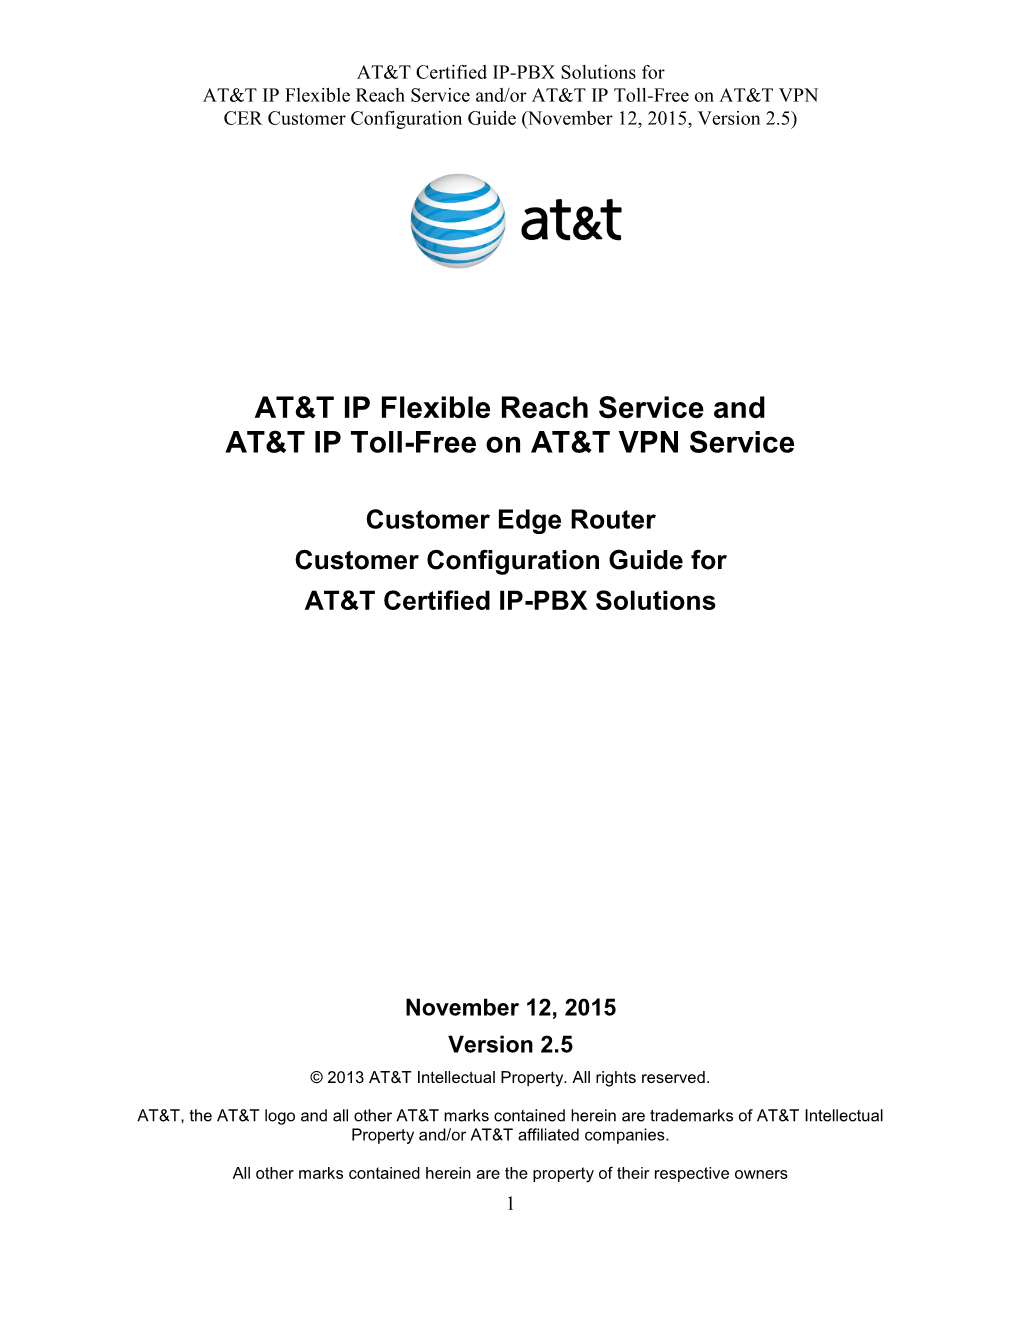 CER CCG for AT&T Certified IP-PBX Solutions for AT&T IP Flexible Reach and IP Toll-Free on AVPN, ISR G2 And